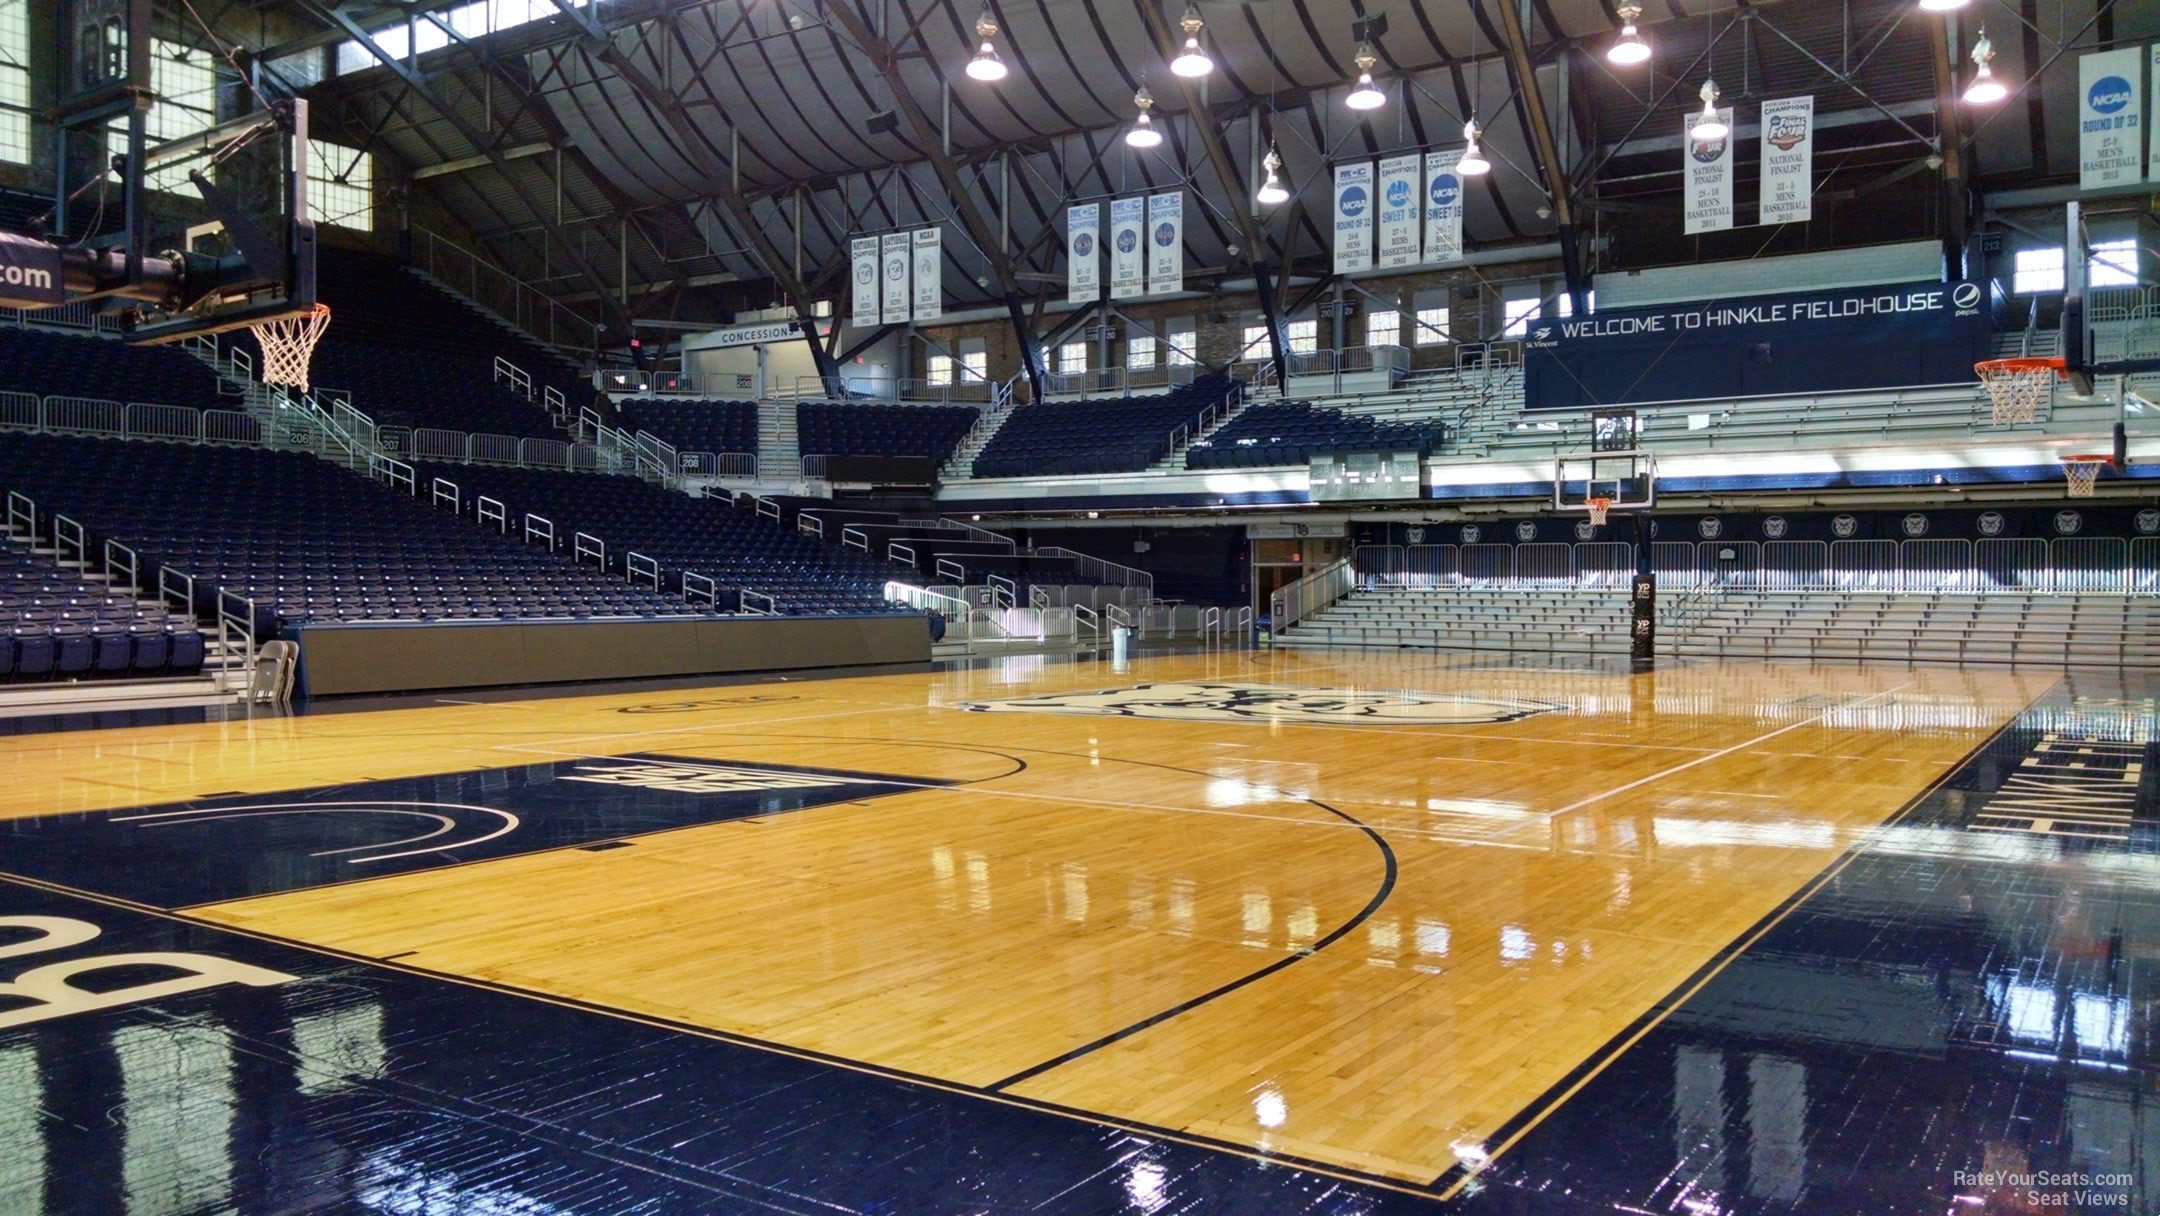 Hinkle Fieldhouse Section 123 - RateYourSeats.com